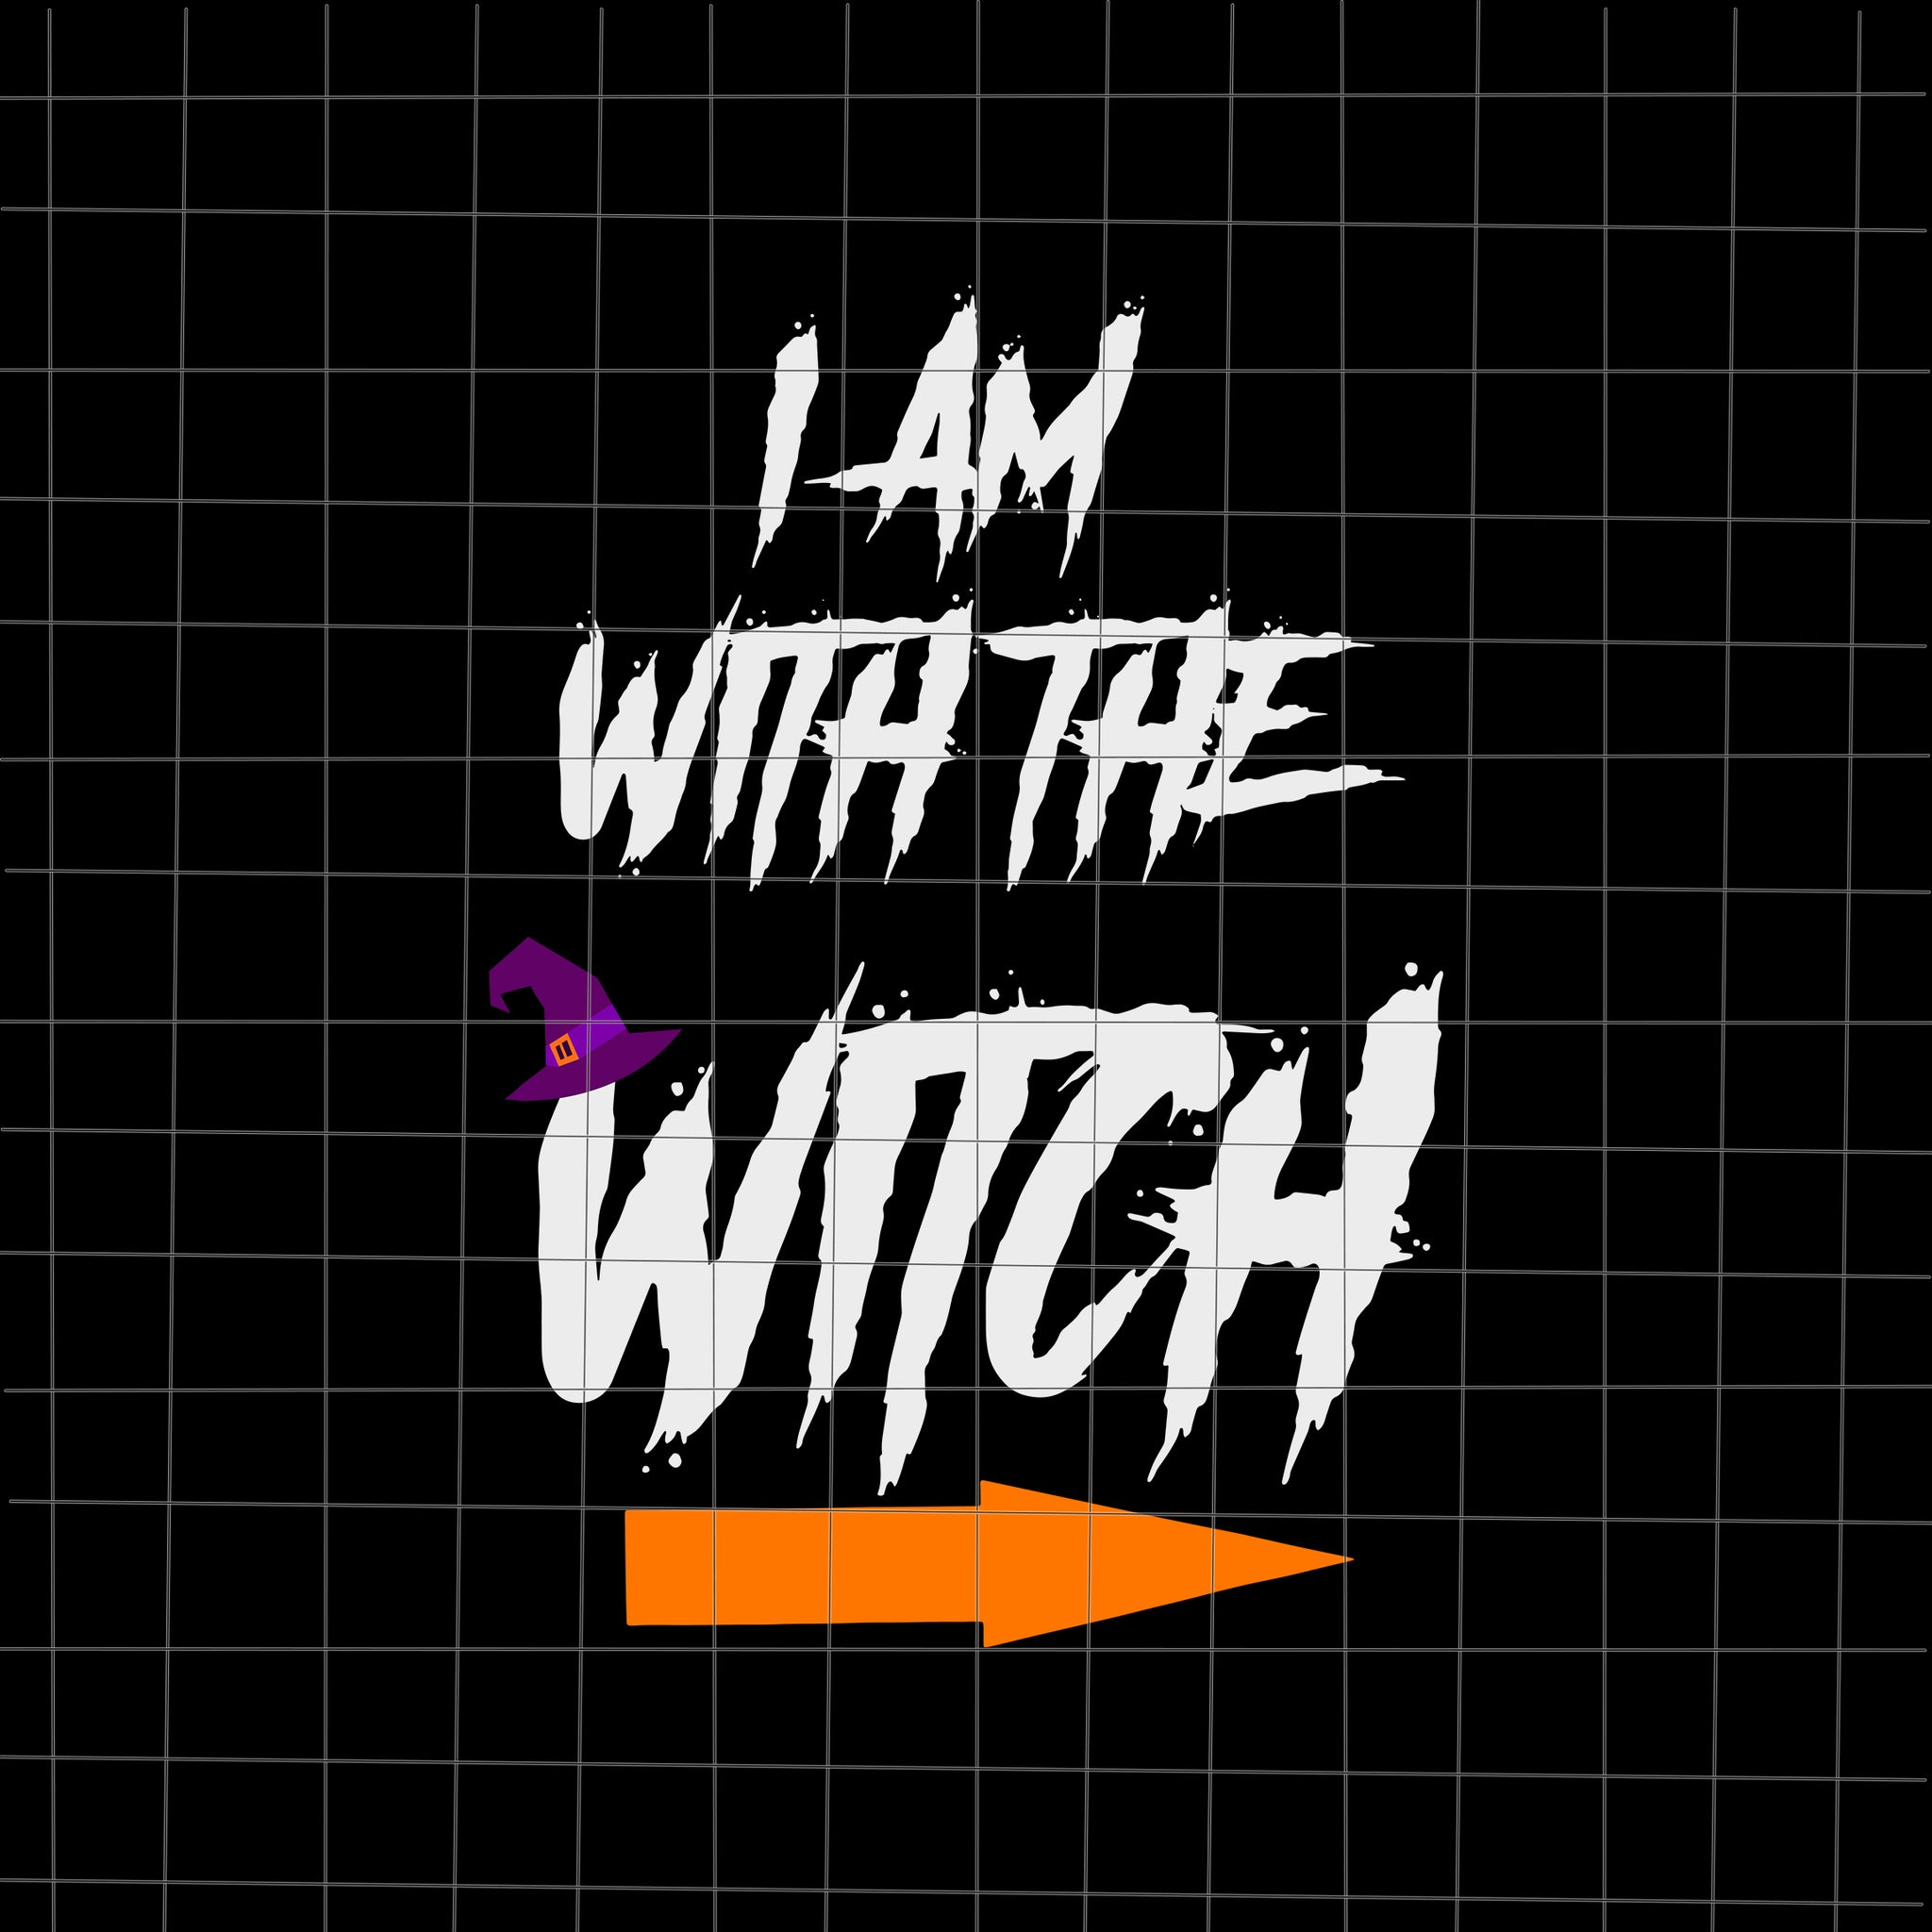 I Am With The Witch Halloween Svg, Witch Halloween Svg, Halloween Svg, Witch Svg